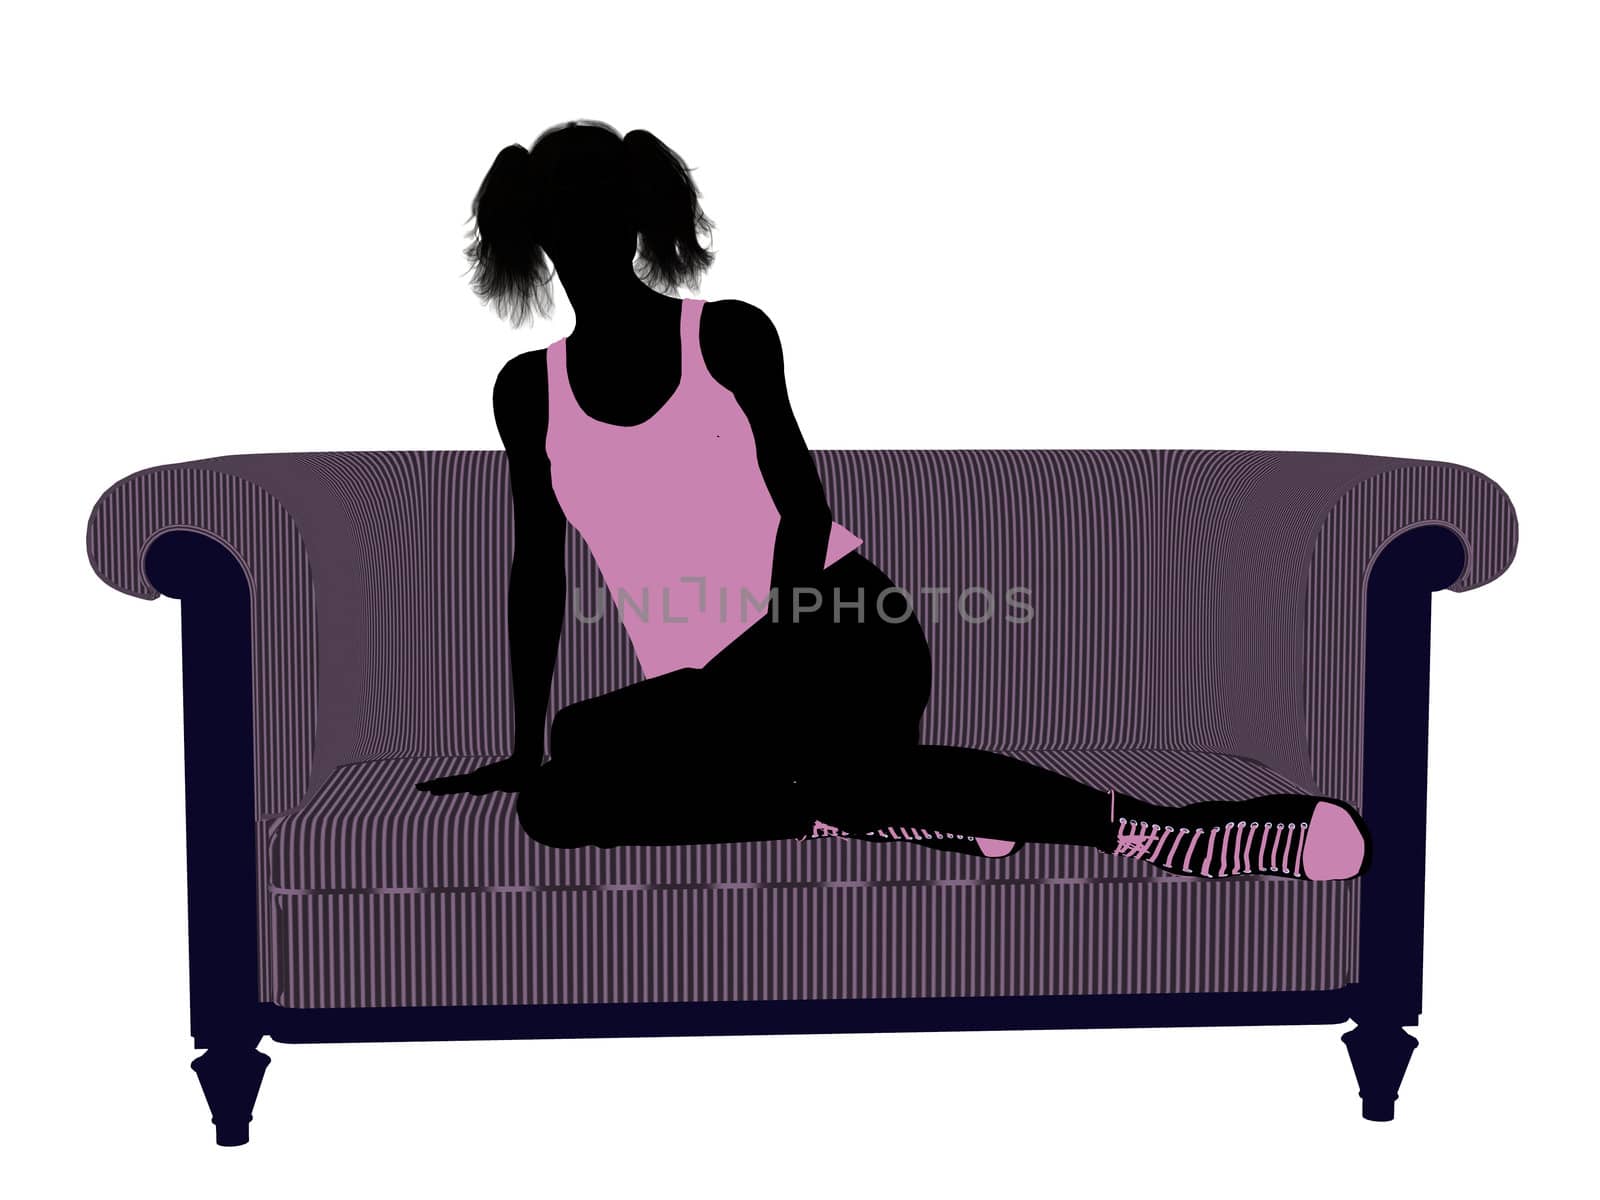 Female Athlete Lying On A Sofa Illustration Silhouette by kathygold